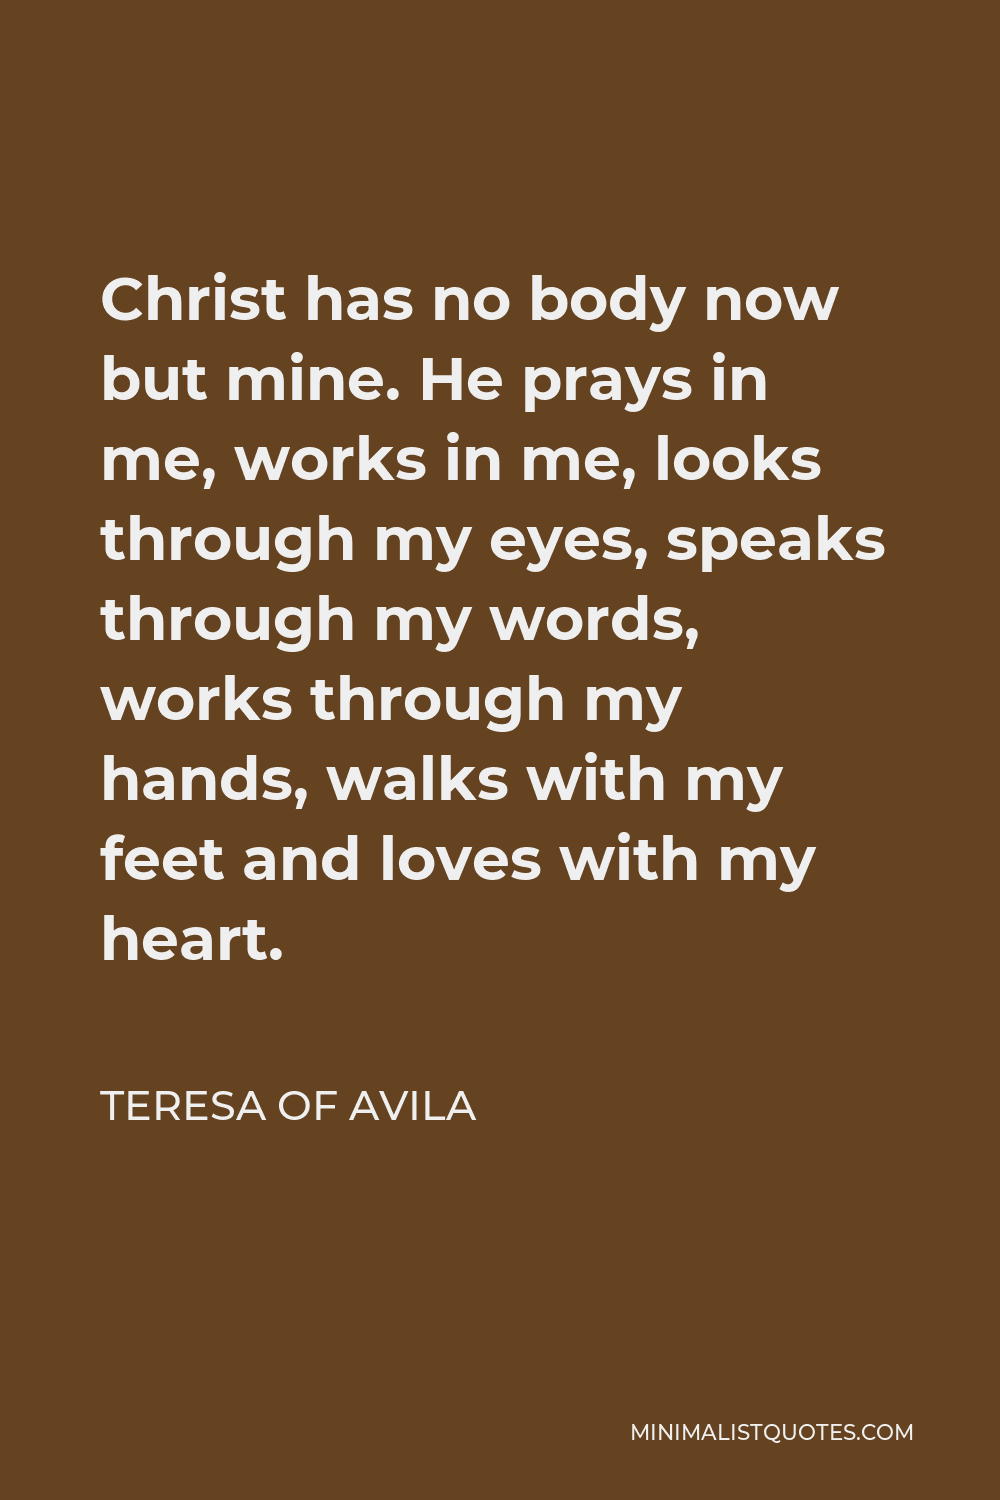 Teresa of Avila Quote - Christ has no body now but mine. He prays in me, works in me, looks through my eyes, speaks through my words, works through my hands, walks with my feet and loves with my heart.